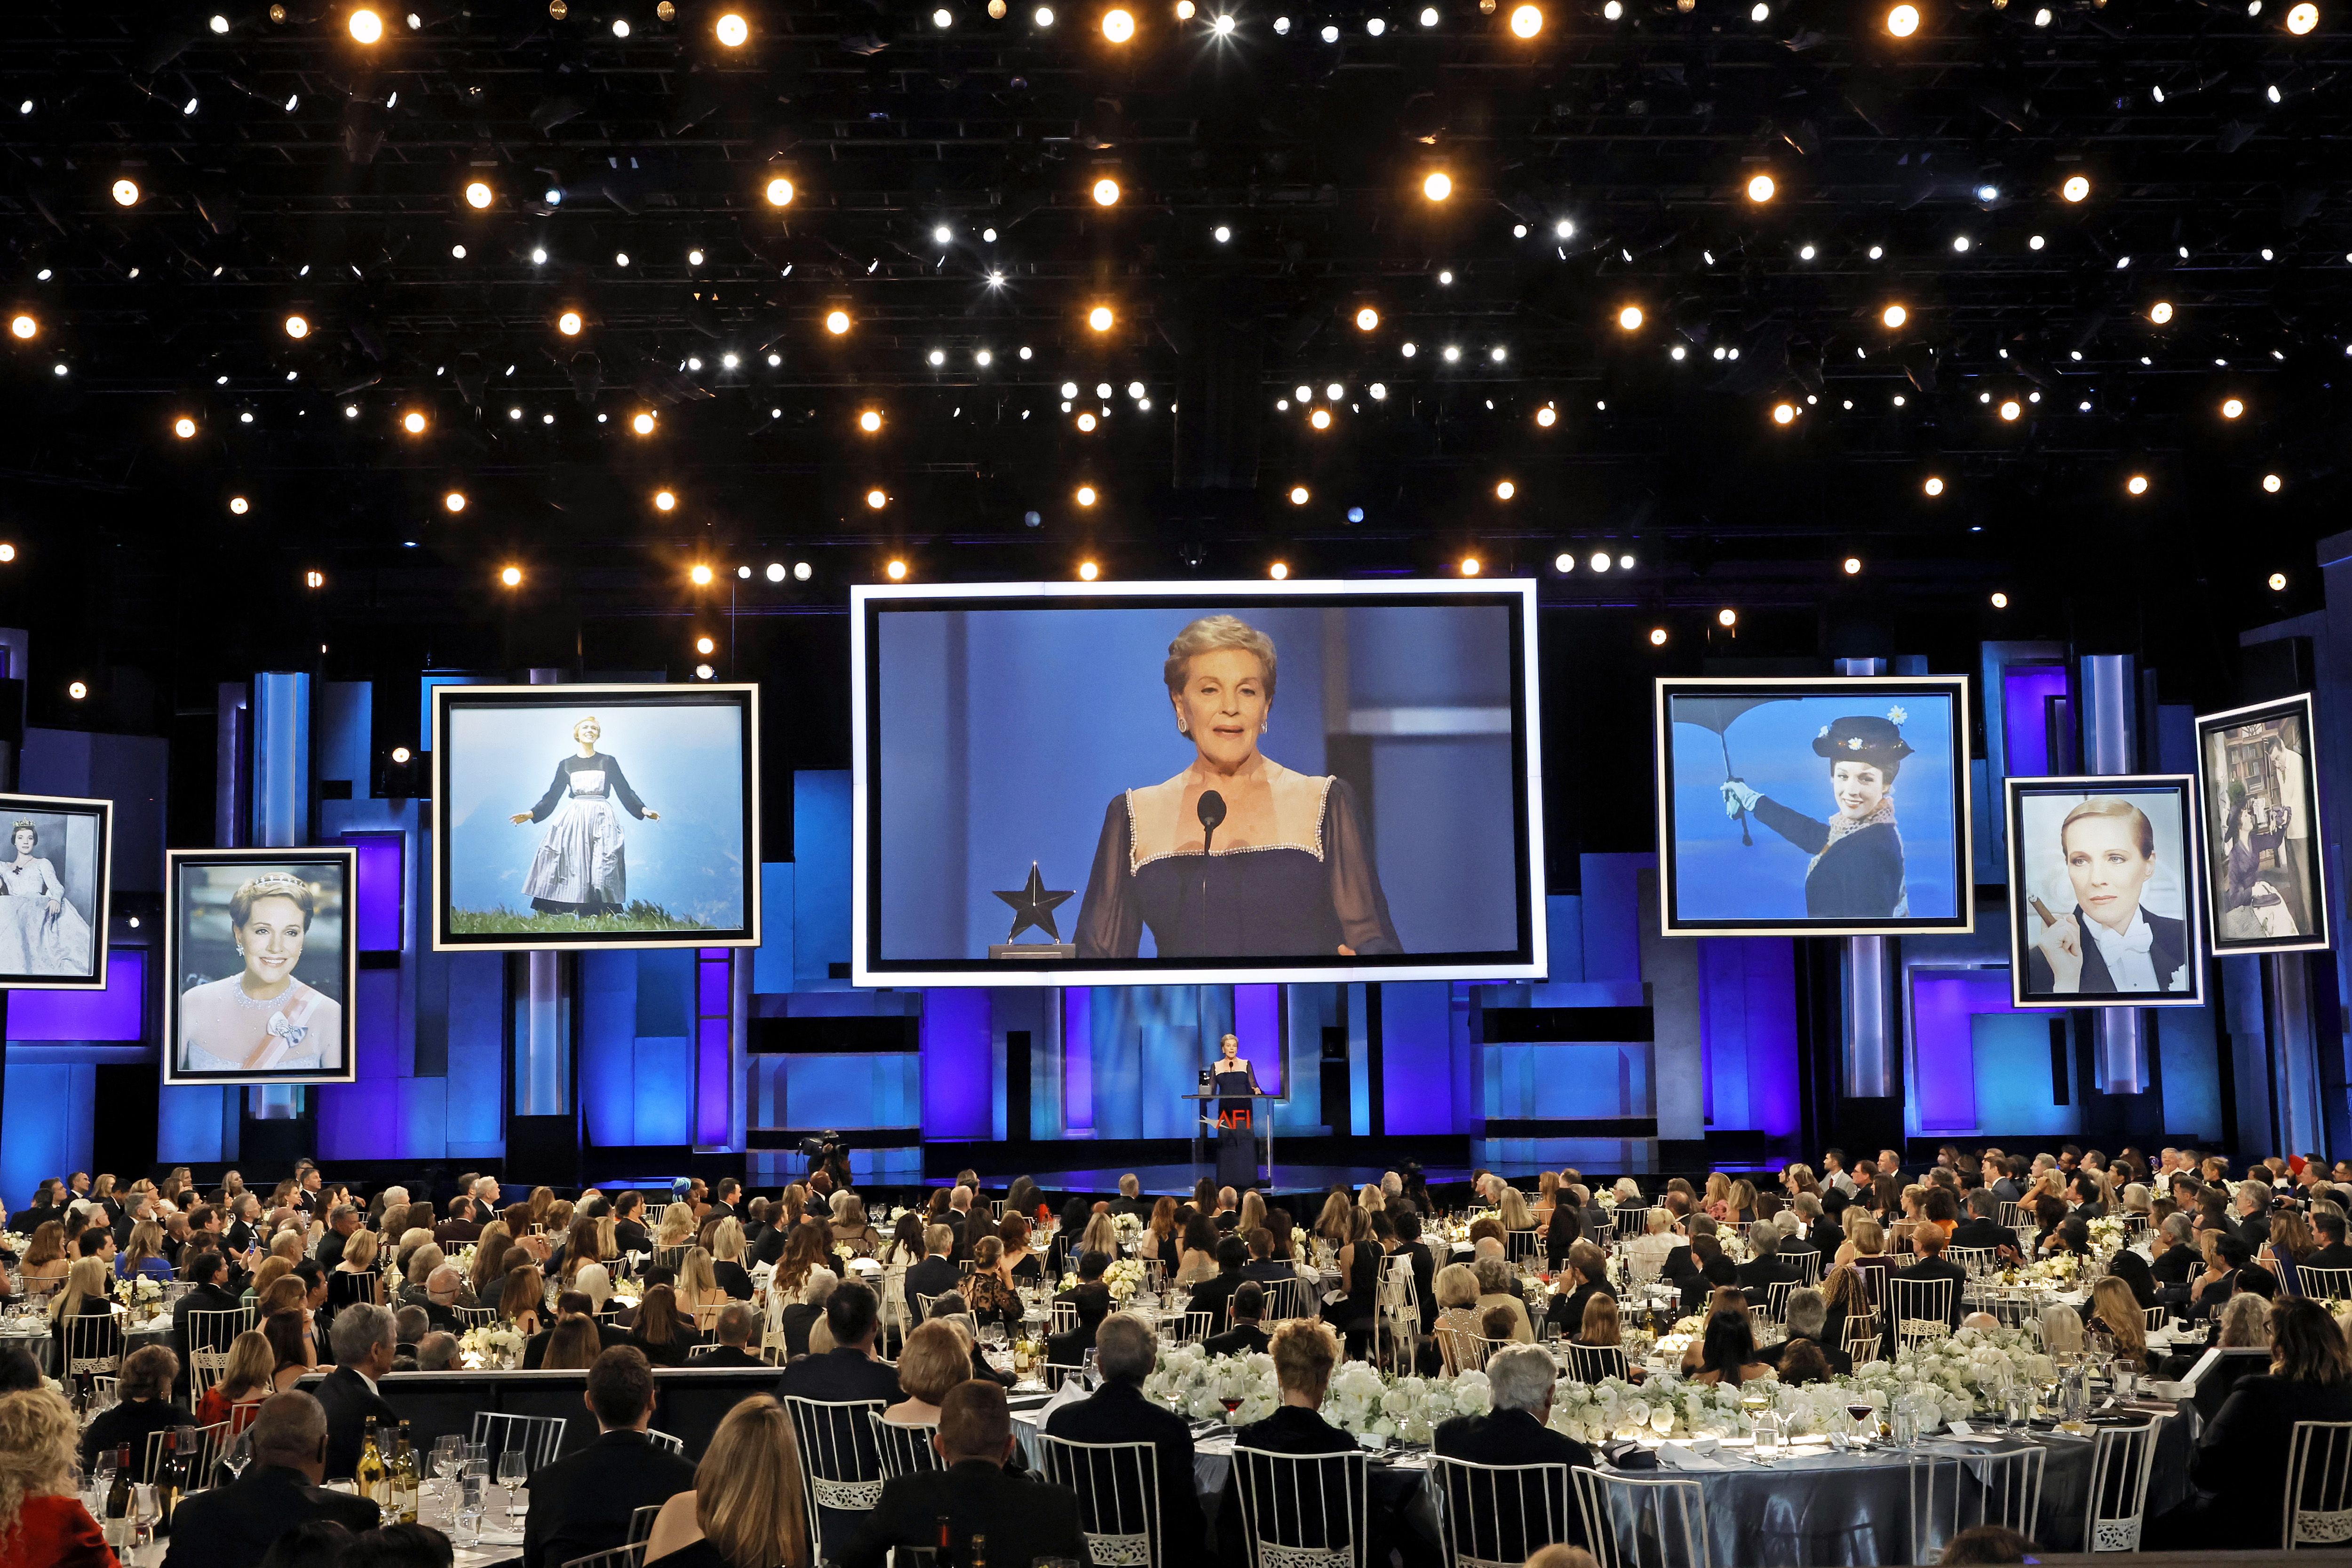 HOLLYWOOD, CALIFORNIA - JUNE 09: Honoree Julie Andrews accepts the AFI Life Achievement Award onstage during the 48th Annual AFI Life Achievement Award Honoring Julie Andrews at Dolby Theatre on June 09, 2022 in Hollywood, California. (Photo by Kevin Winter/Getty Images for TNT)